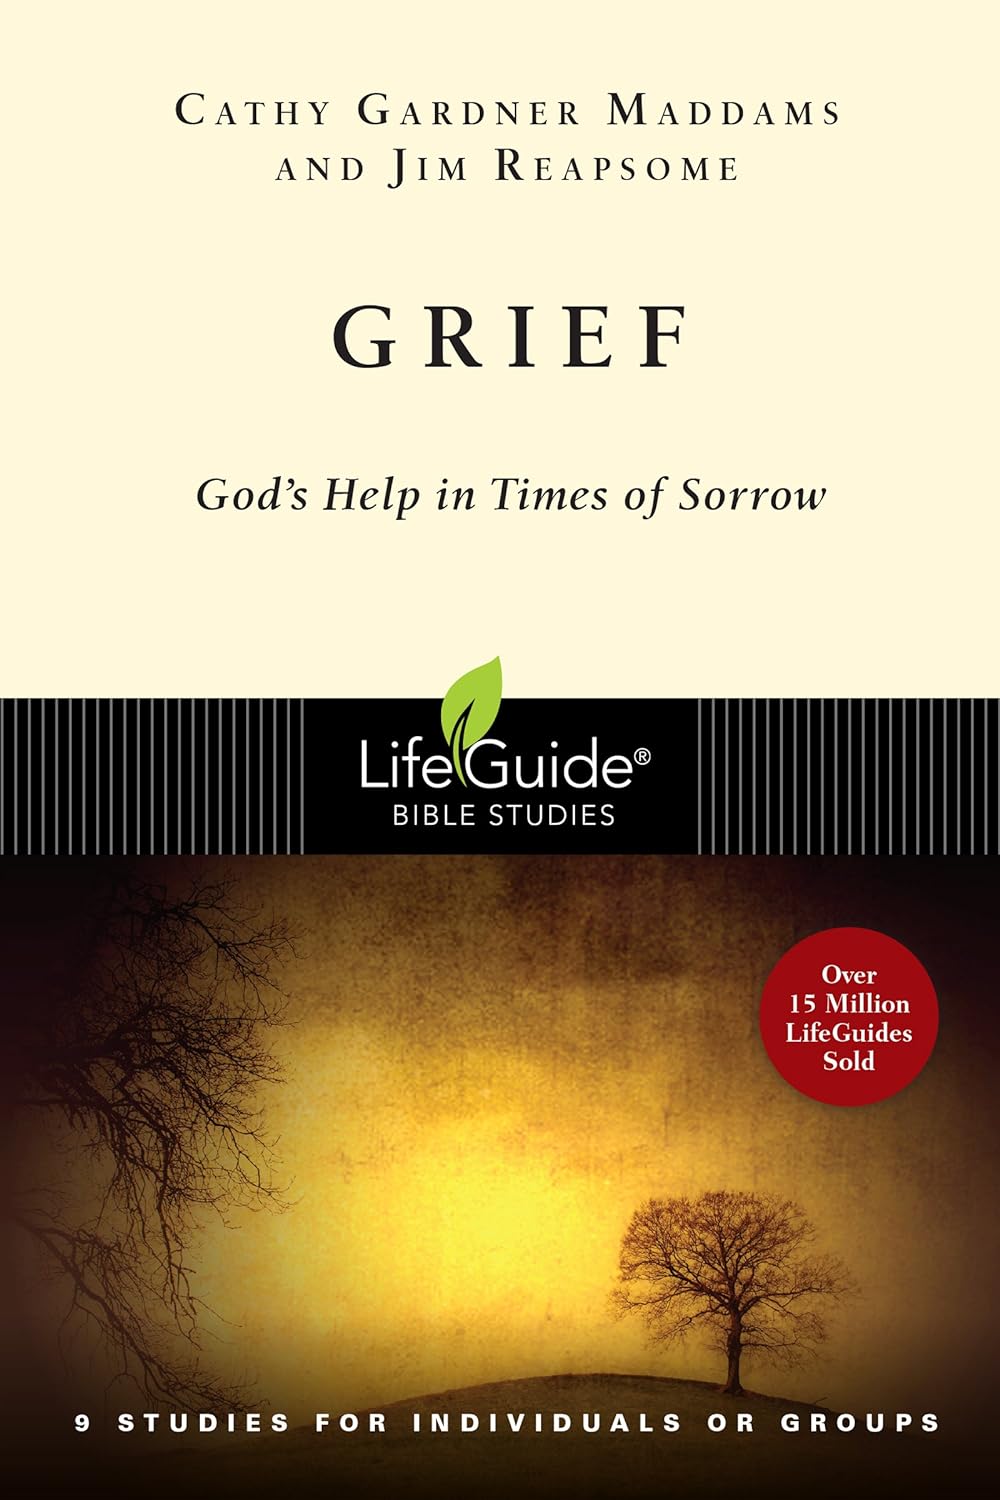 Lifeguide Bible Study - Grief